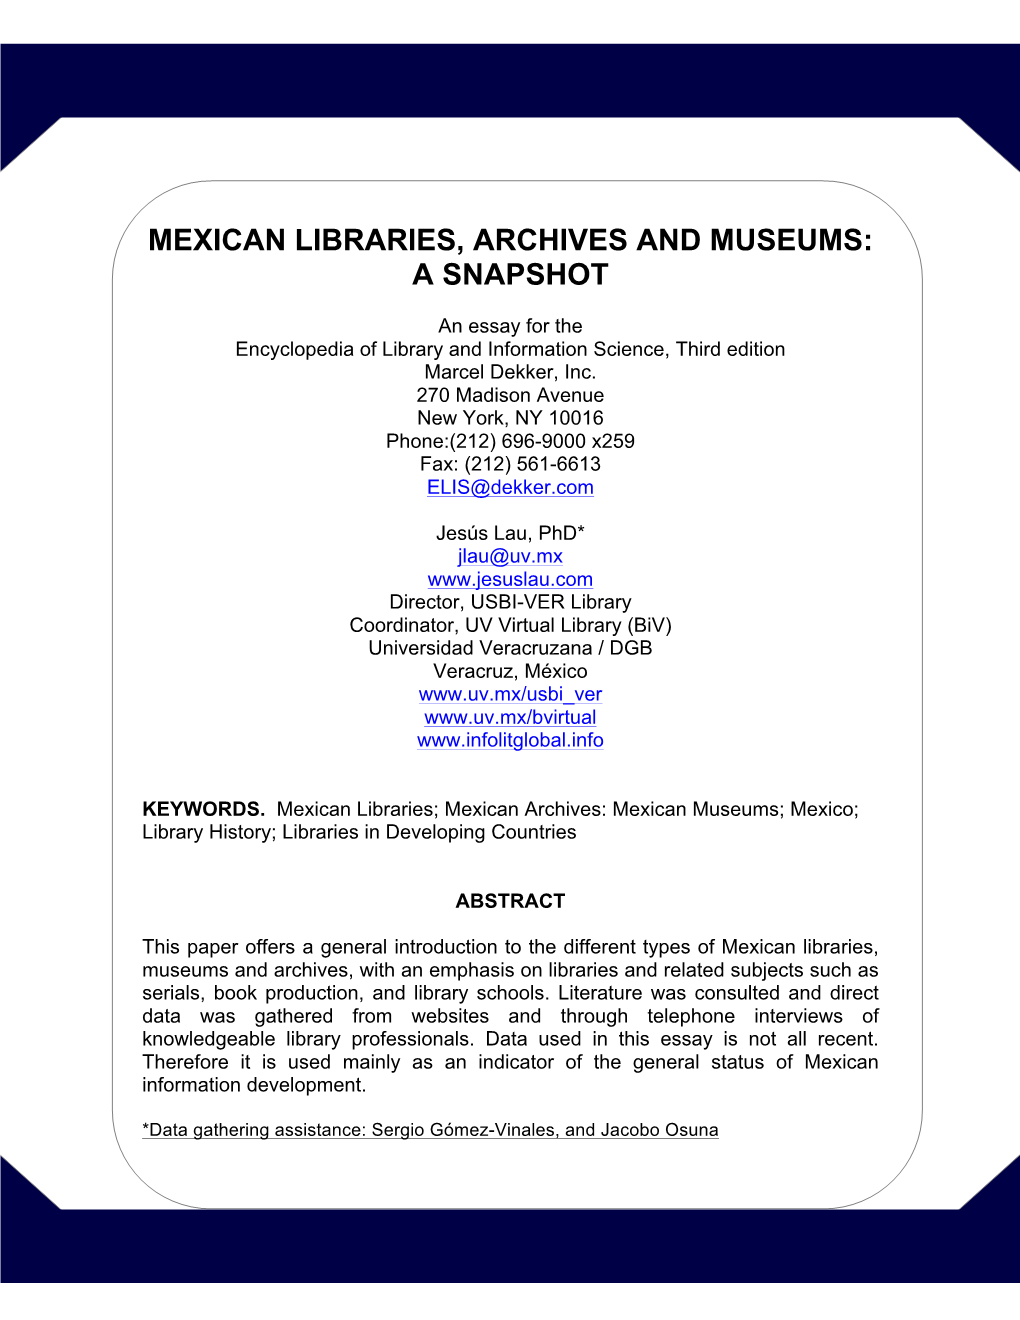 Mexican Libraries, Archives and Museums: a Snapshot